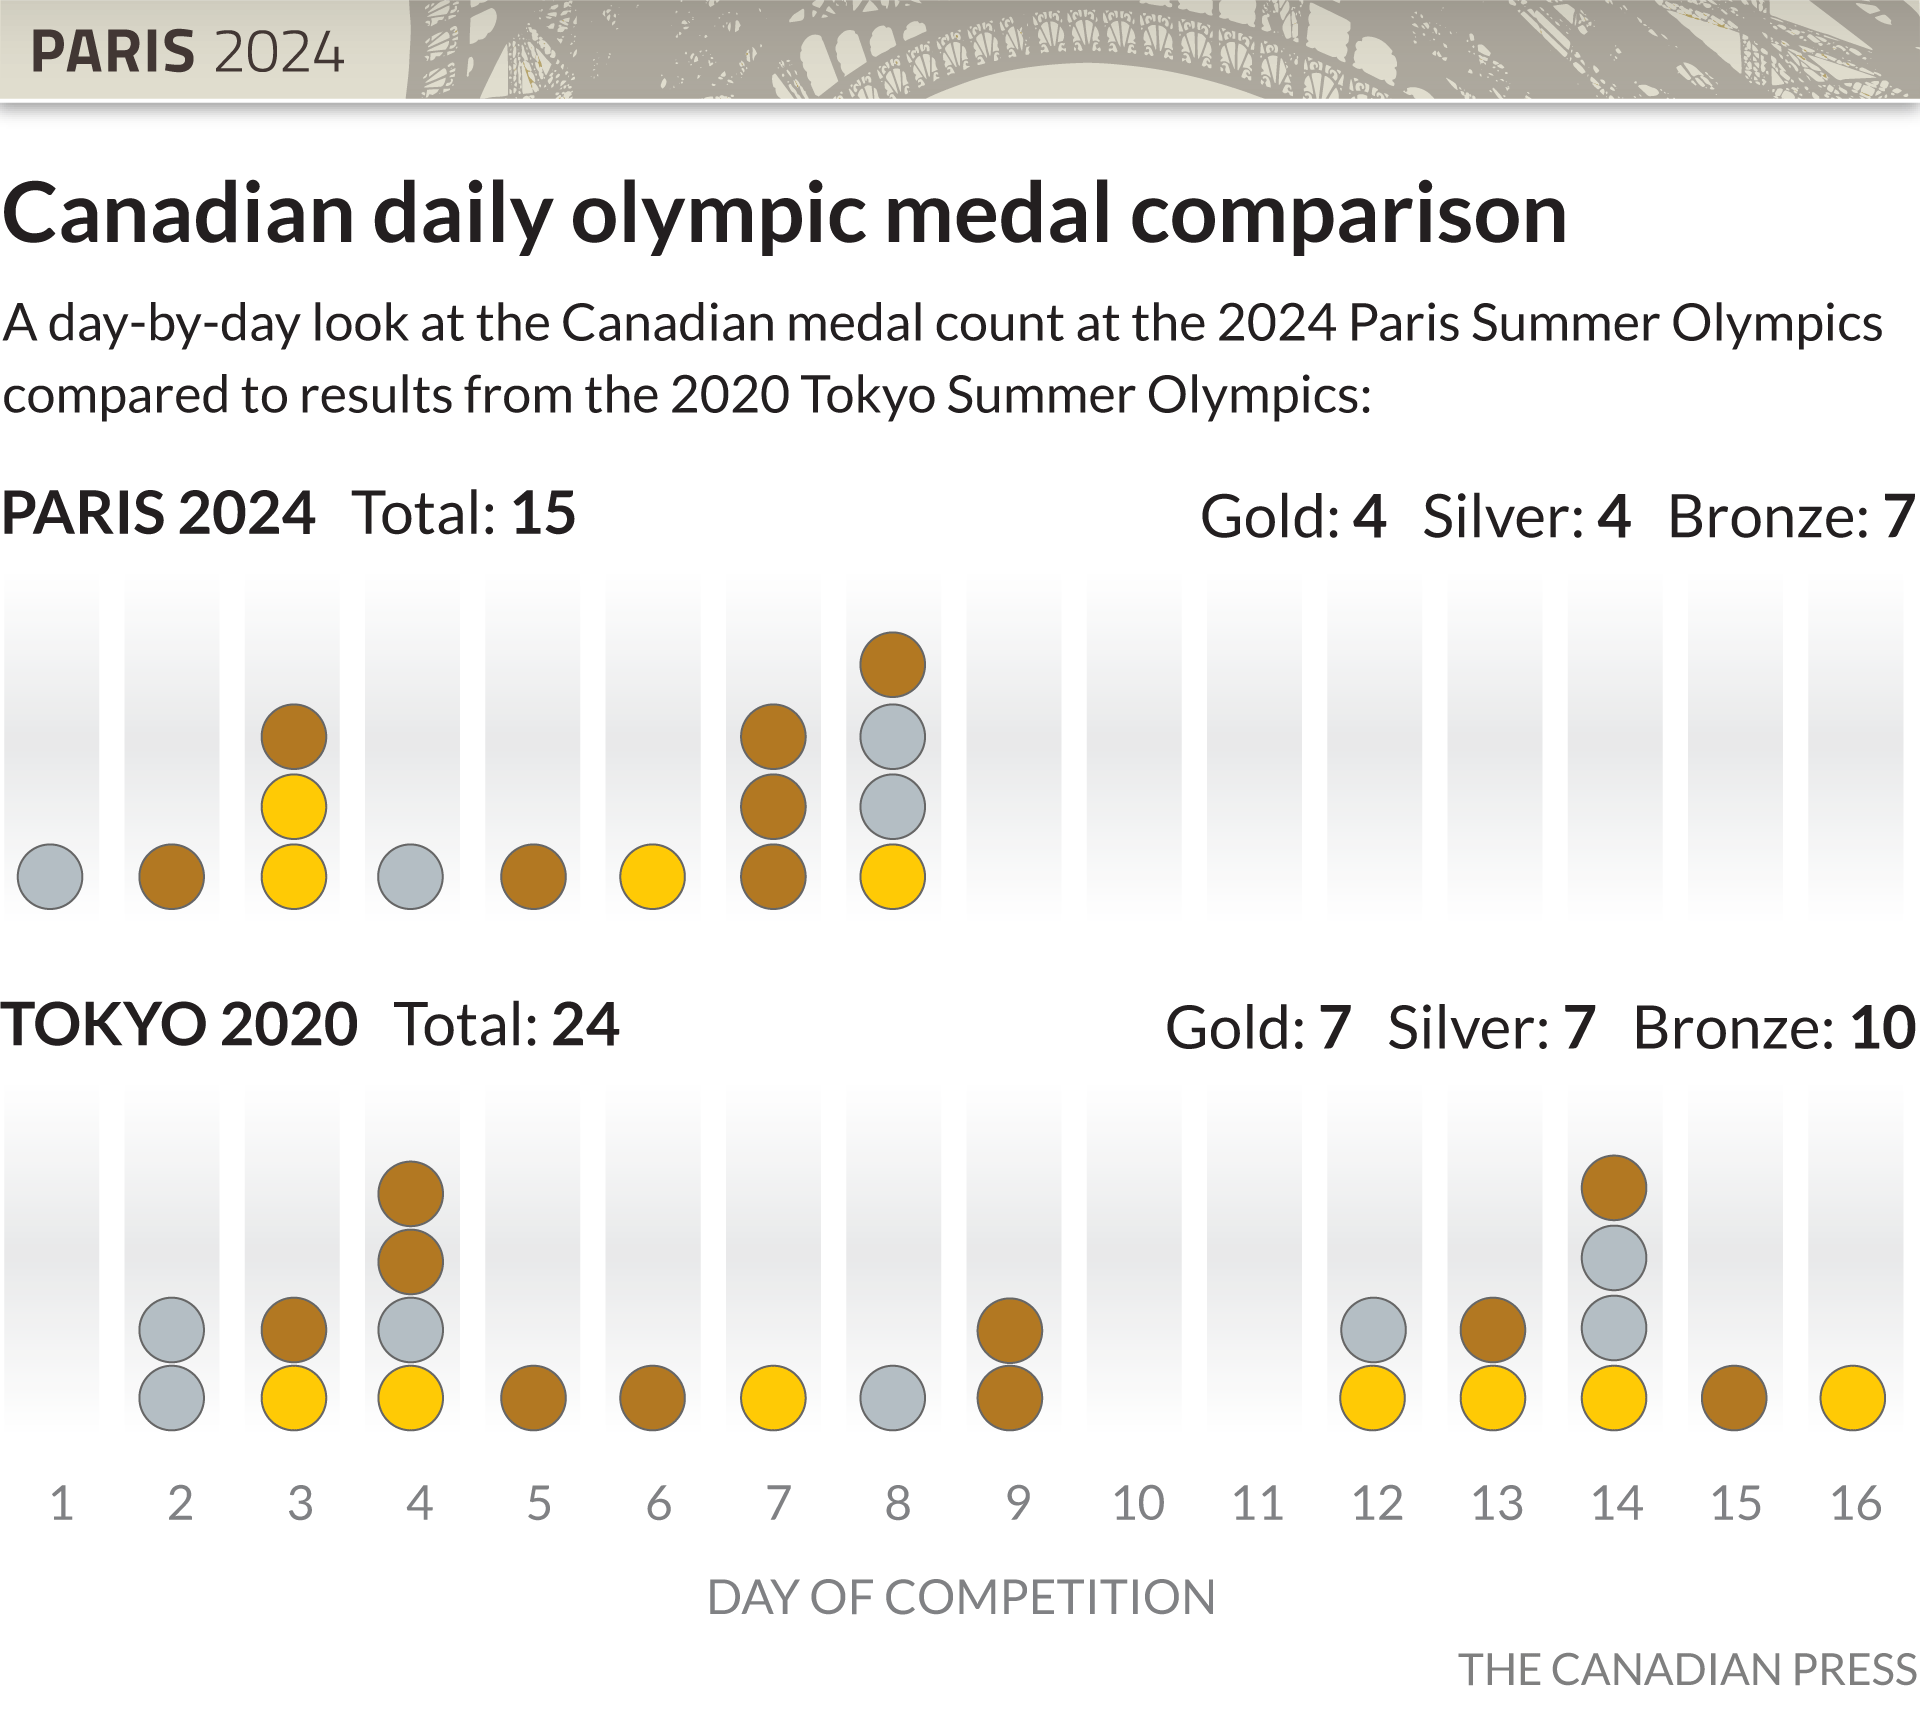 Canada's daily Olympic medal comparison